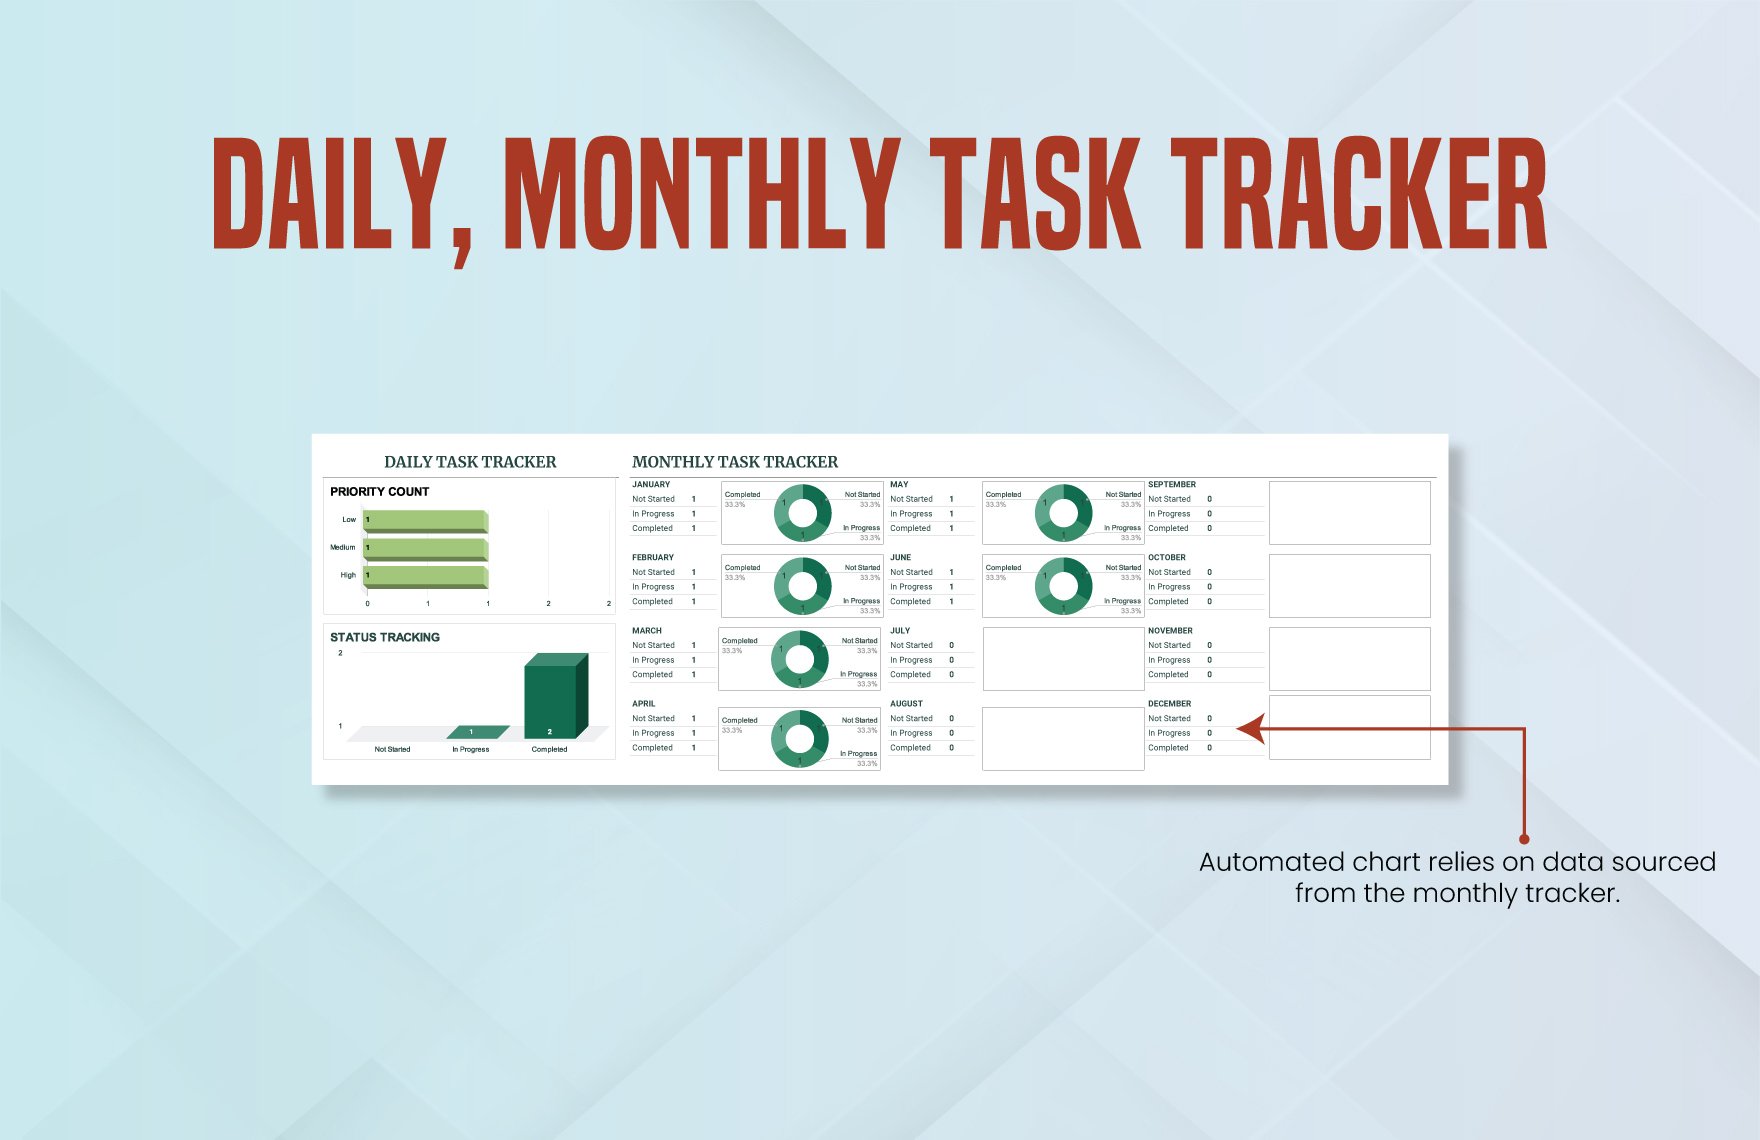 Daily and Monthly Task Tracker Template